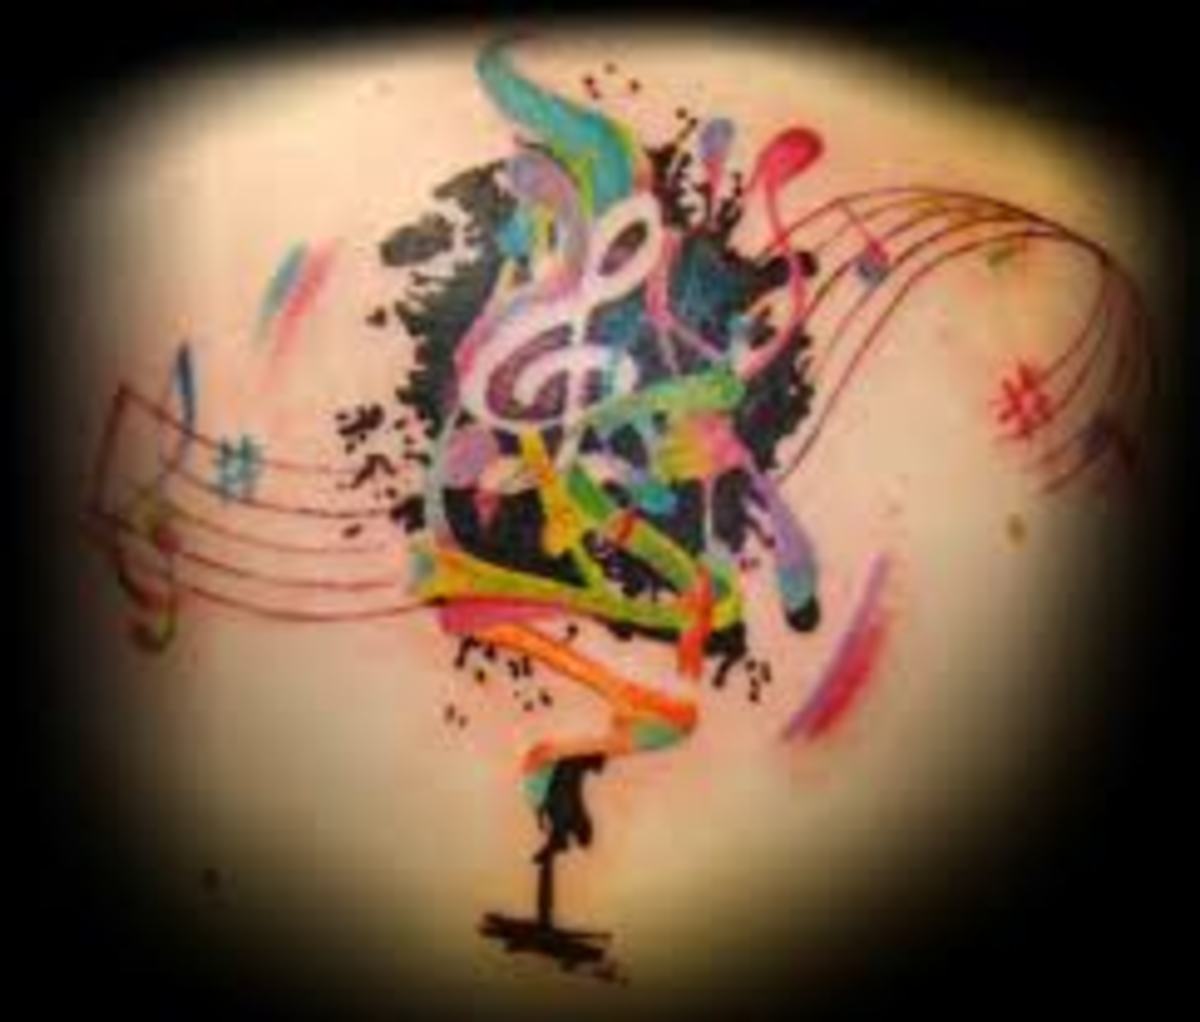 music-tattoos-and-designs-music-tattoos-and-meanings